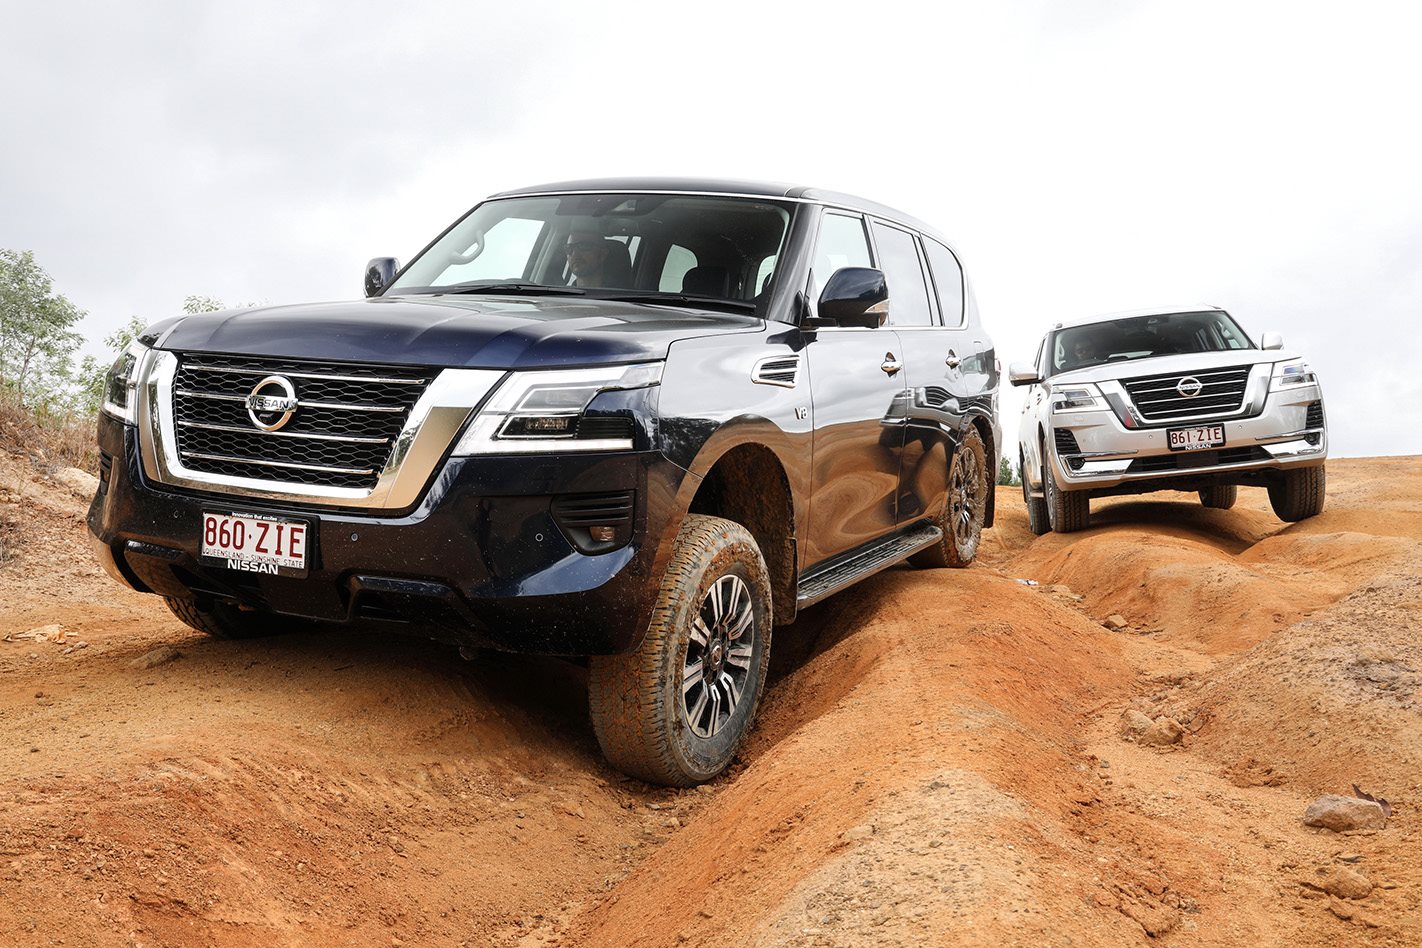 Nissan Patrol 2020 Review, Price & Features